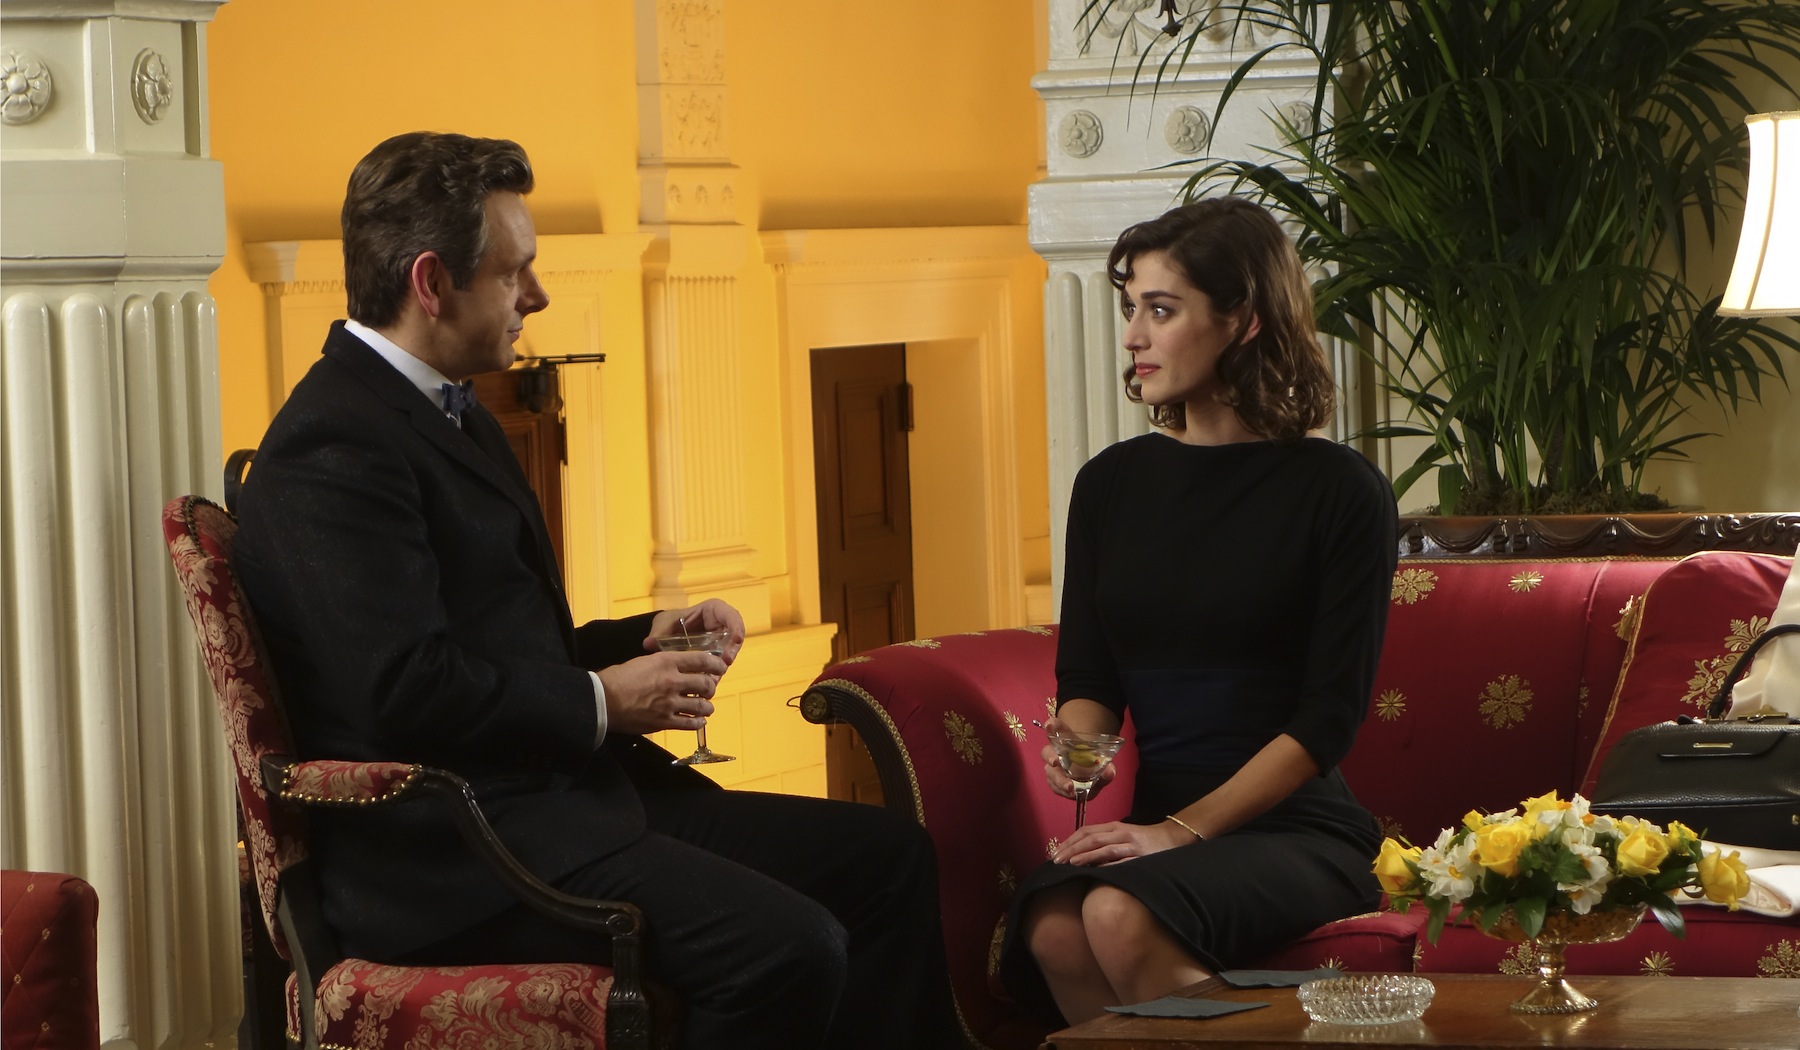 Michael Sheen as Dr. William Masters and Lizzy Caplan as Virginia Johnson in Masters of Sex (Michael Desmond—Showtime)